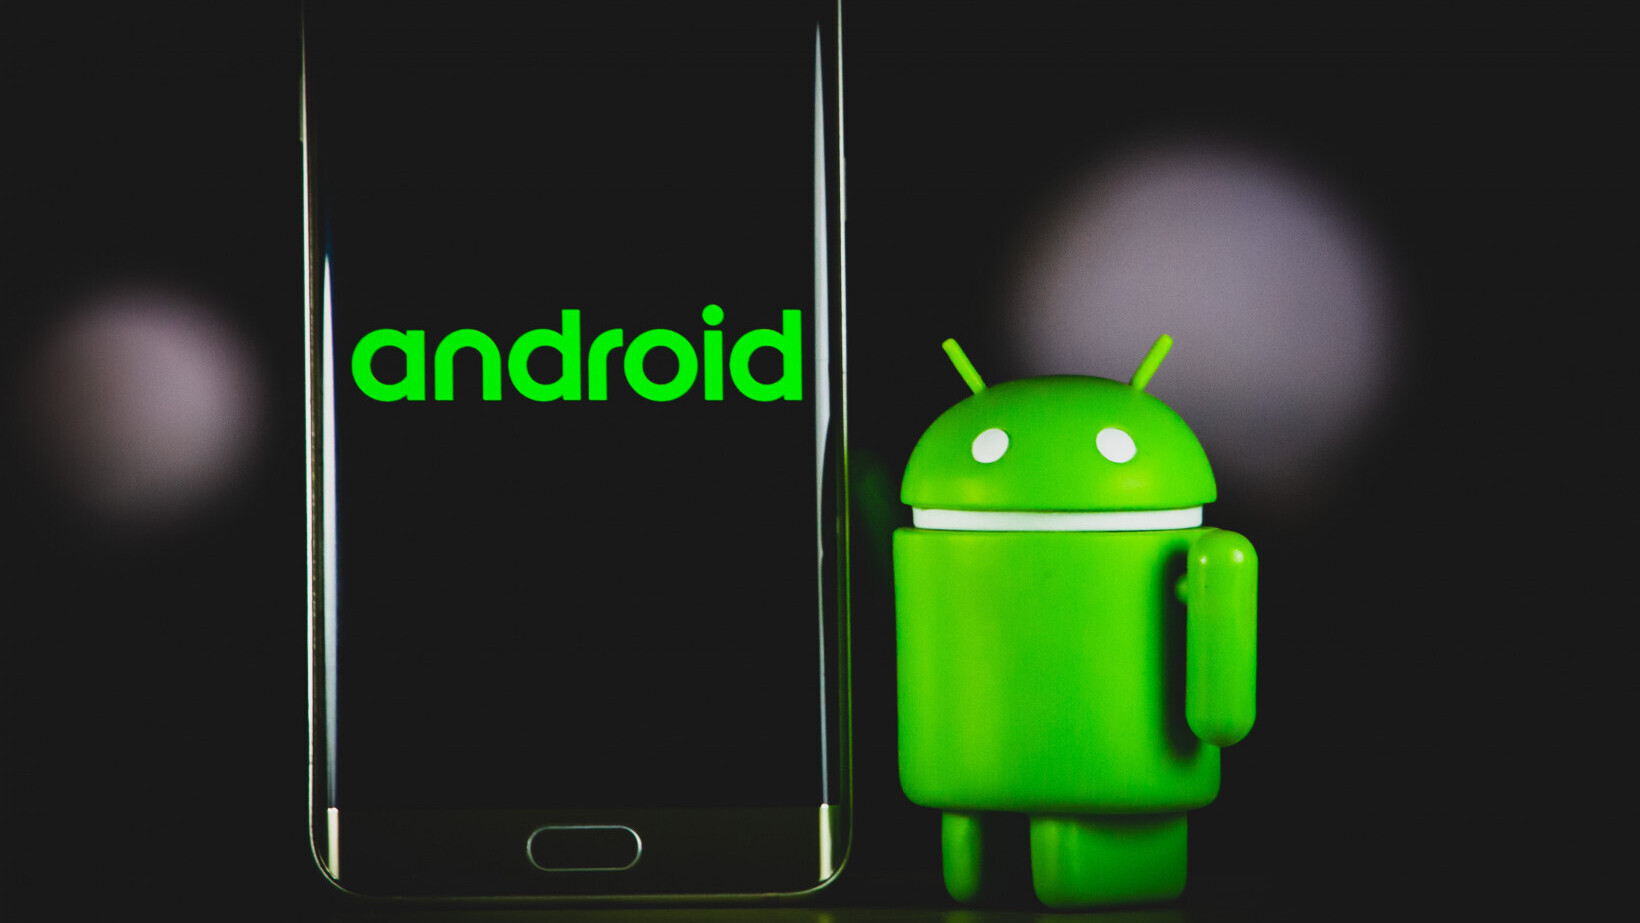 Android devs, rejoice! Google will take less of your cash — here are the details